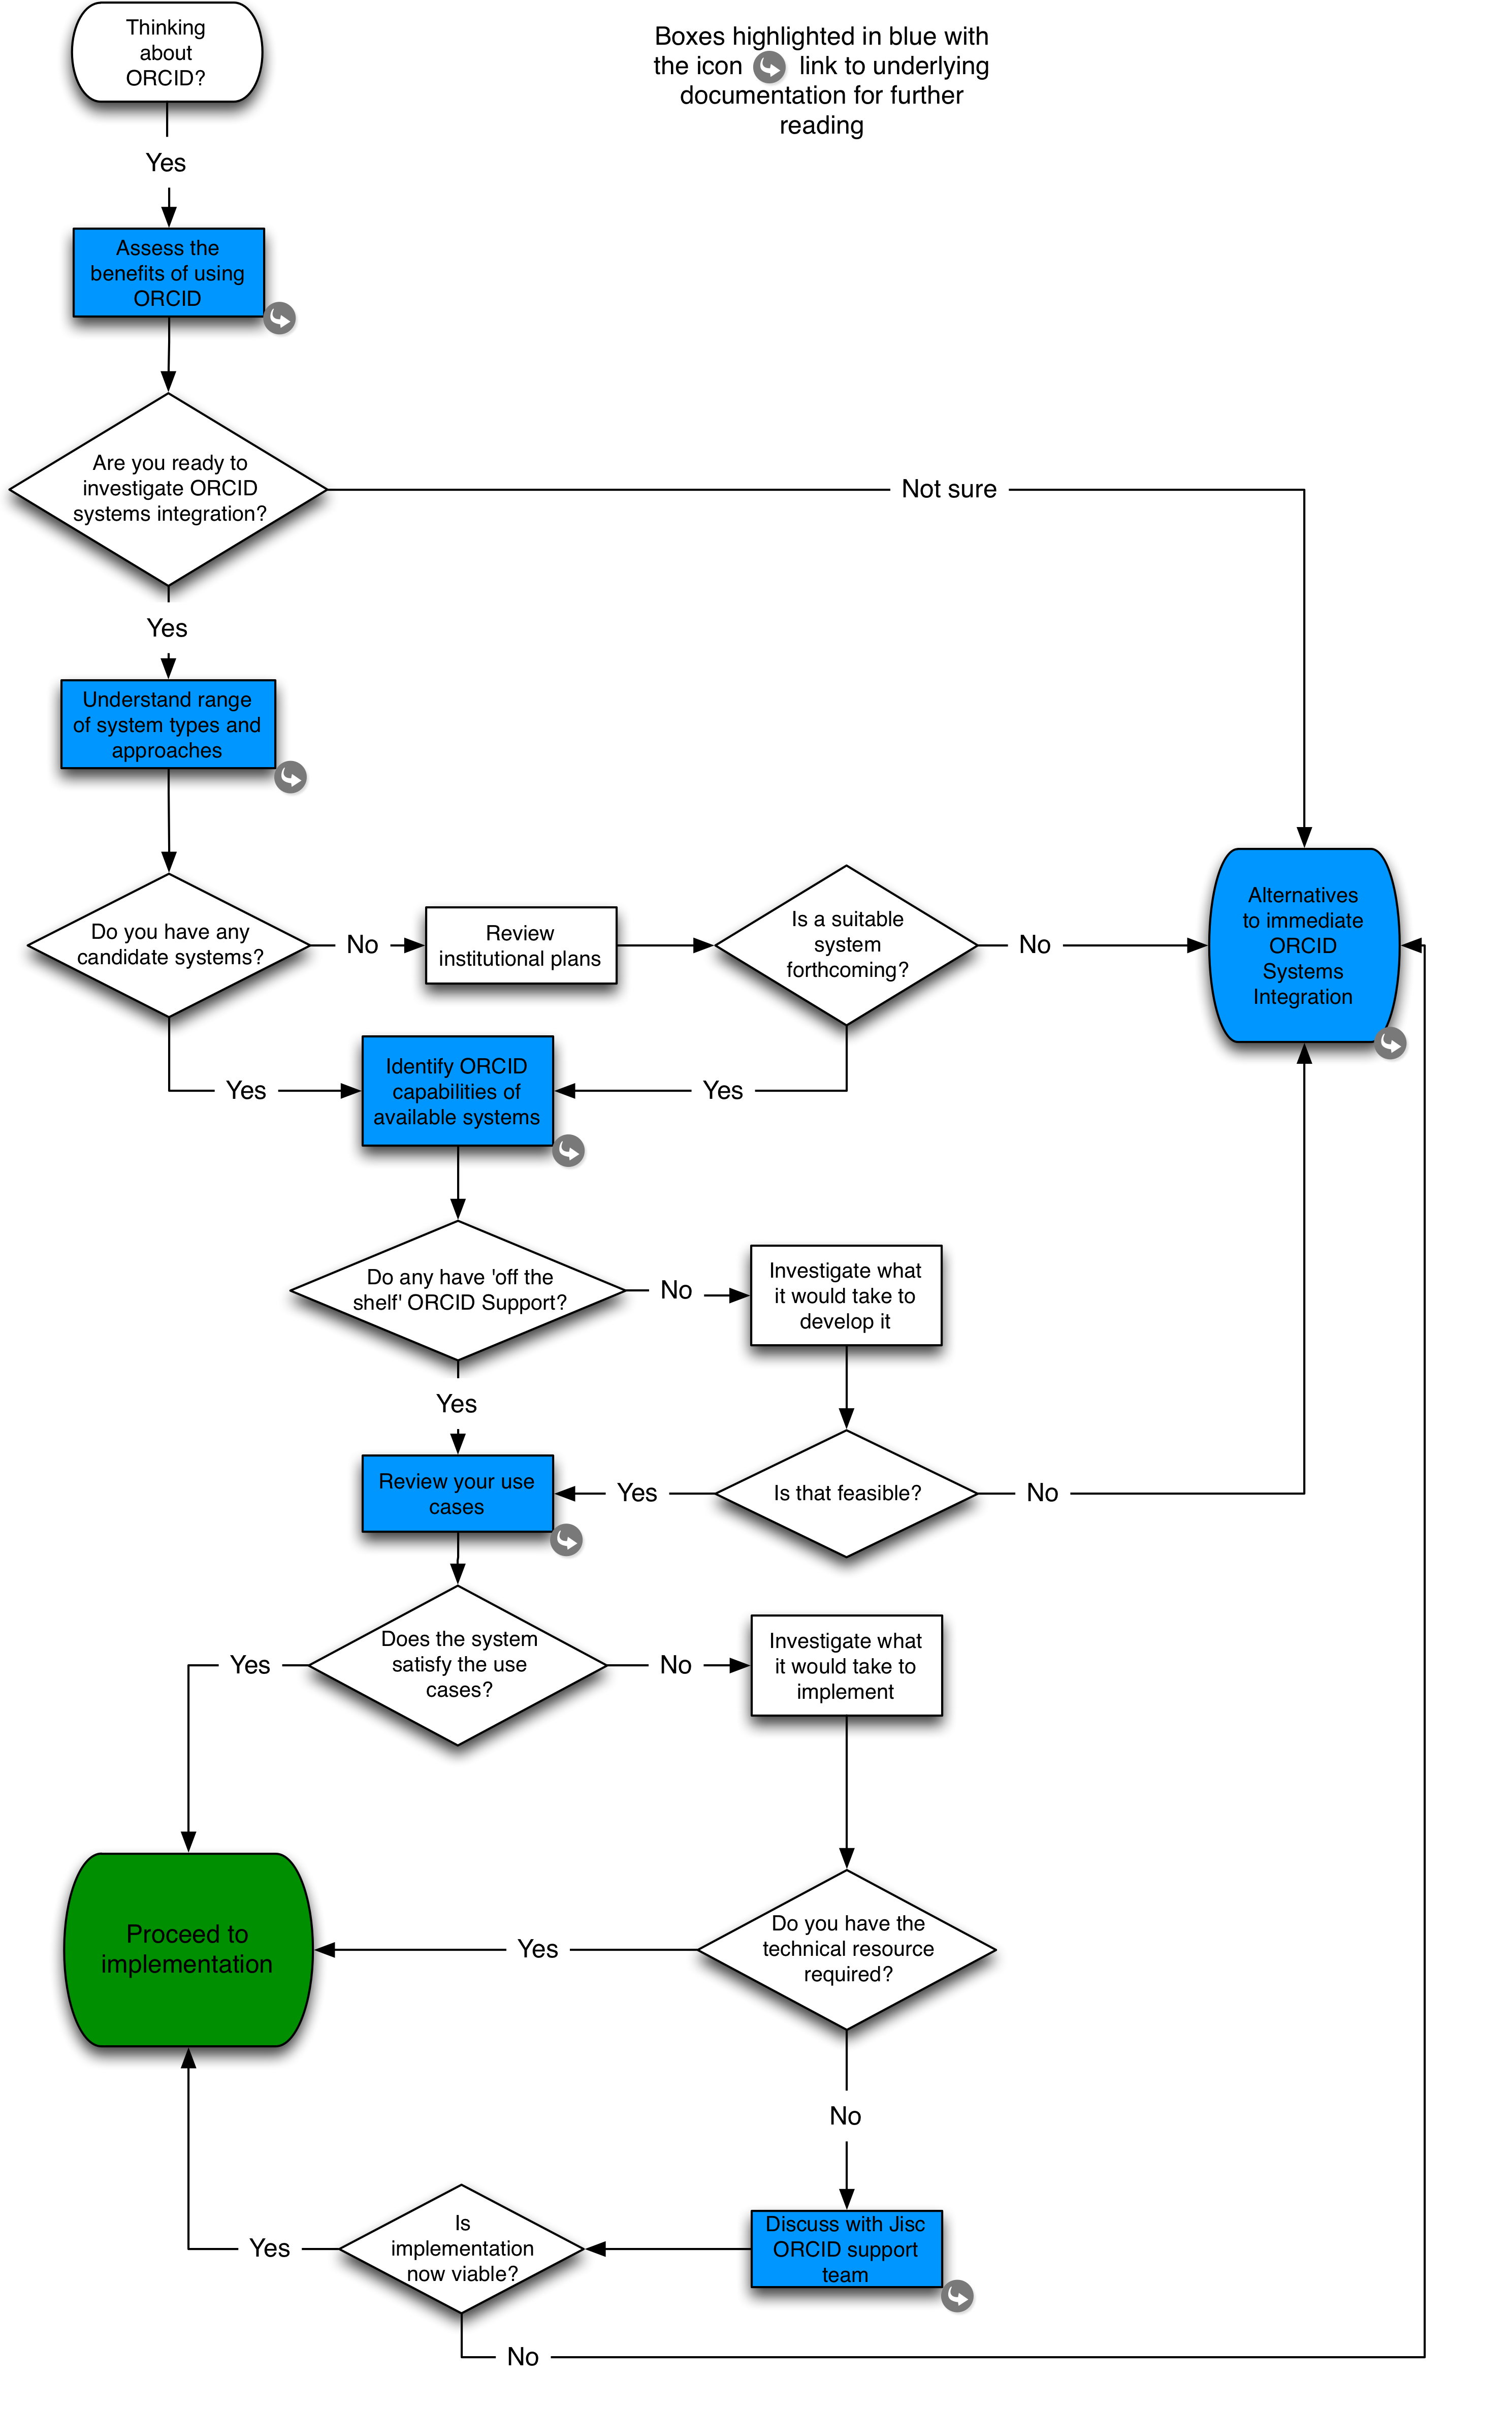 Decision tree diagram to help decide whether Orcid integration is possible.